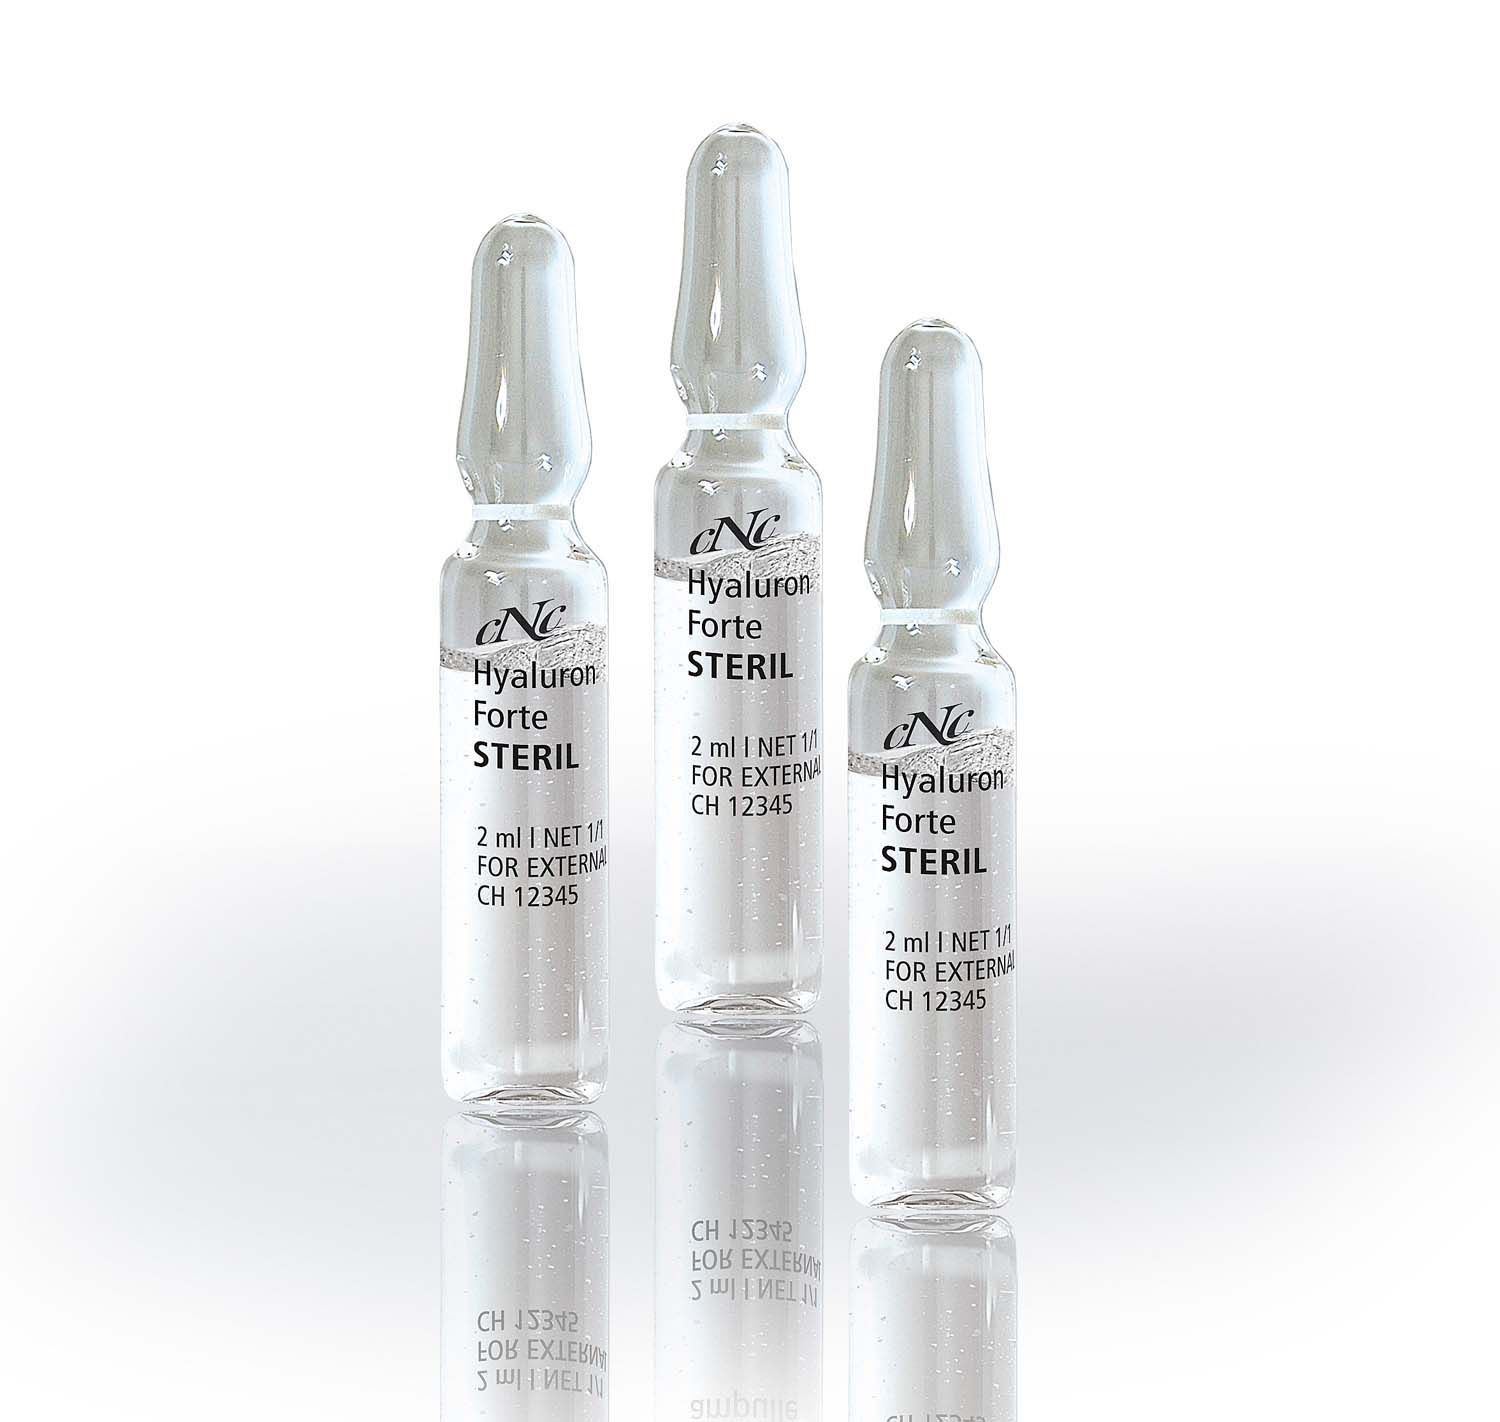 CNC Cosmetic aesthetic world Hyaluron Forte STERIL